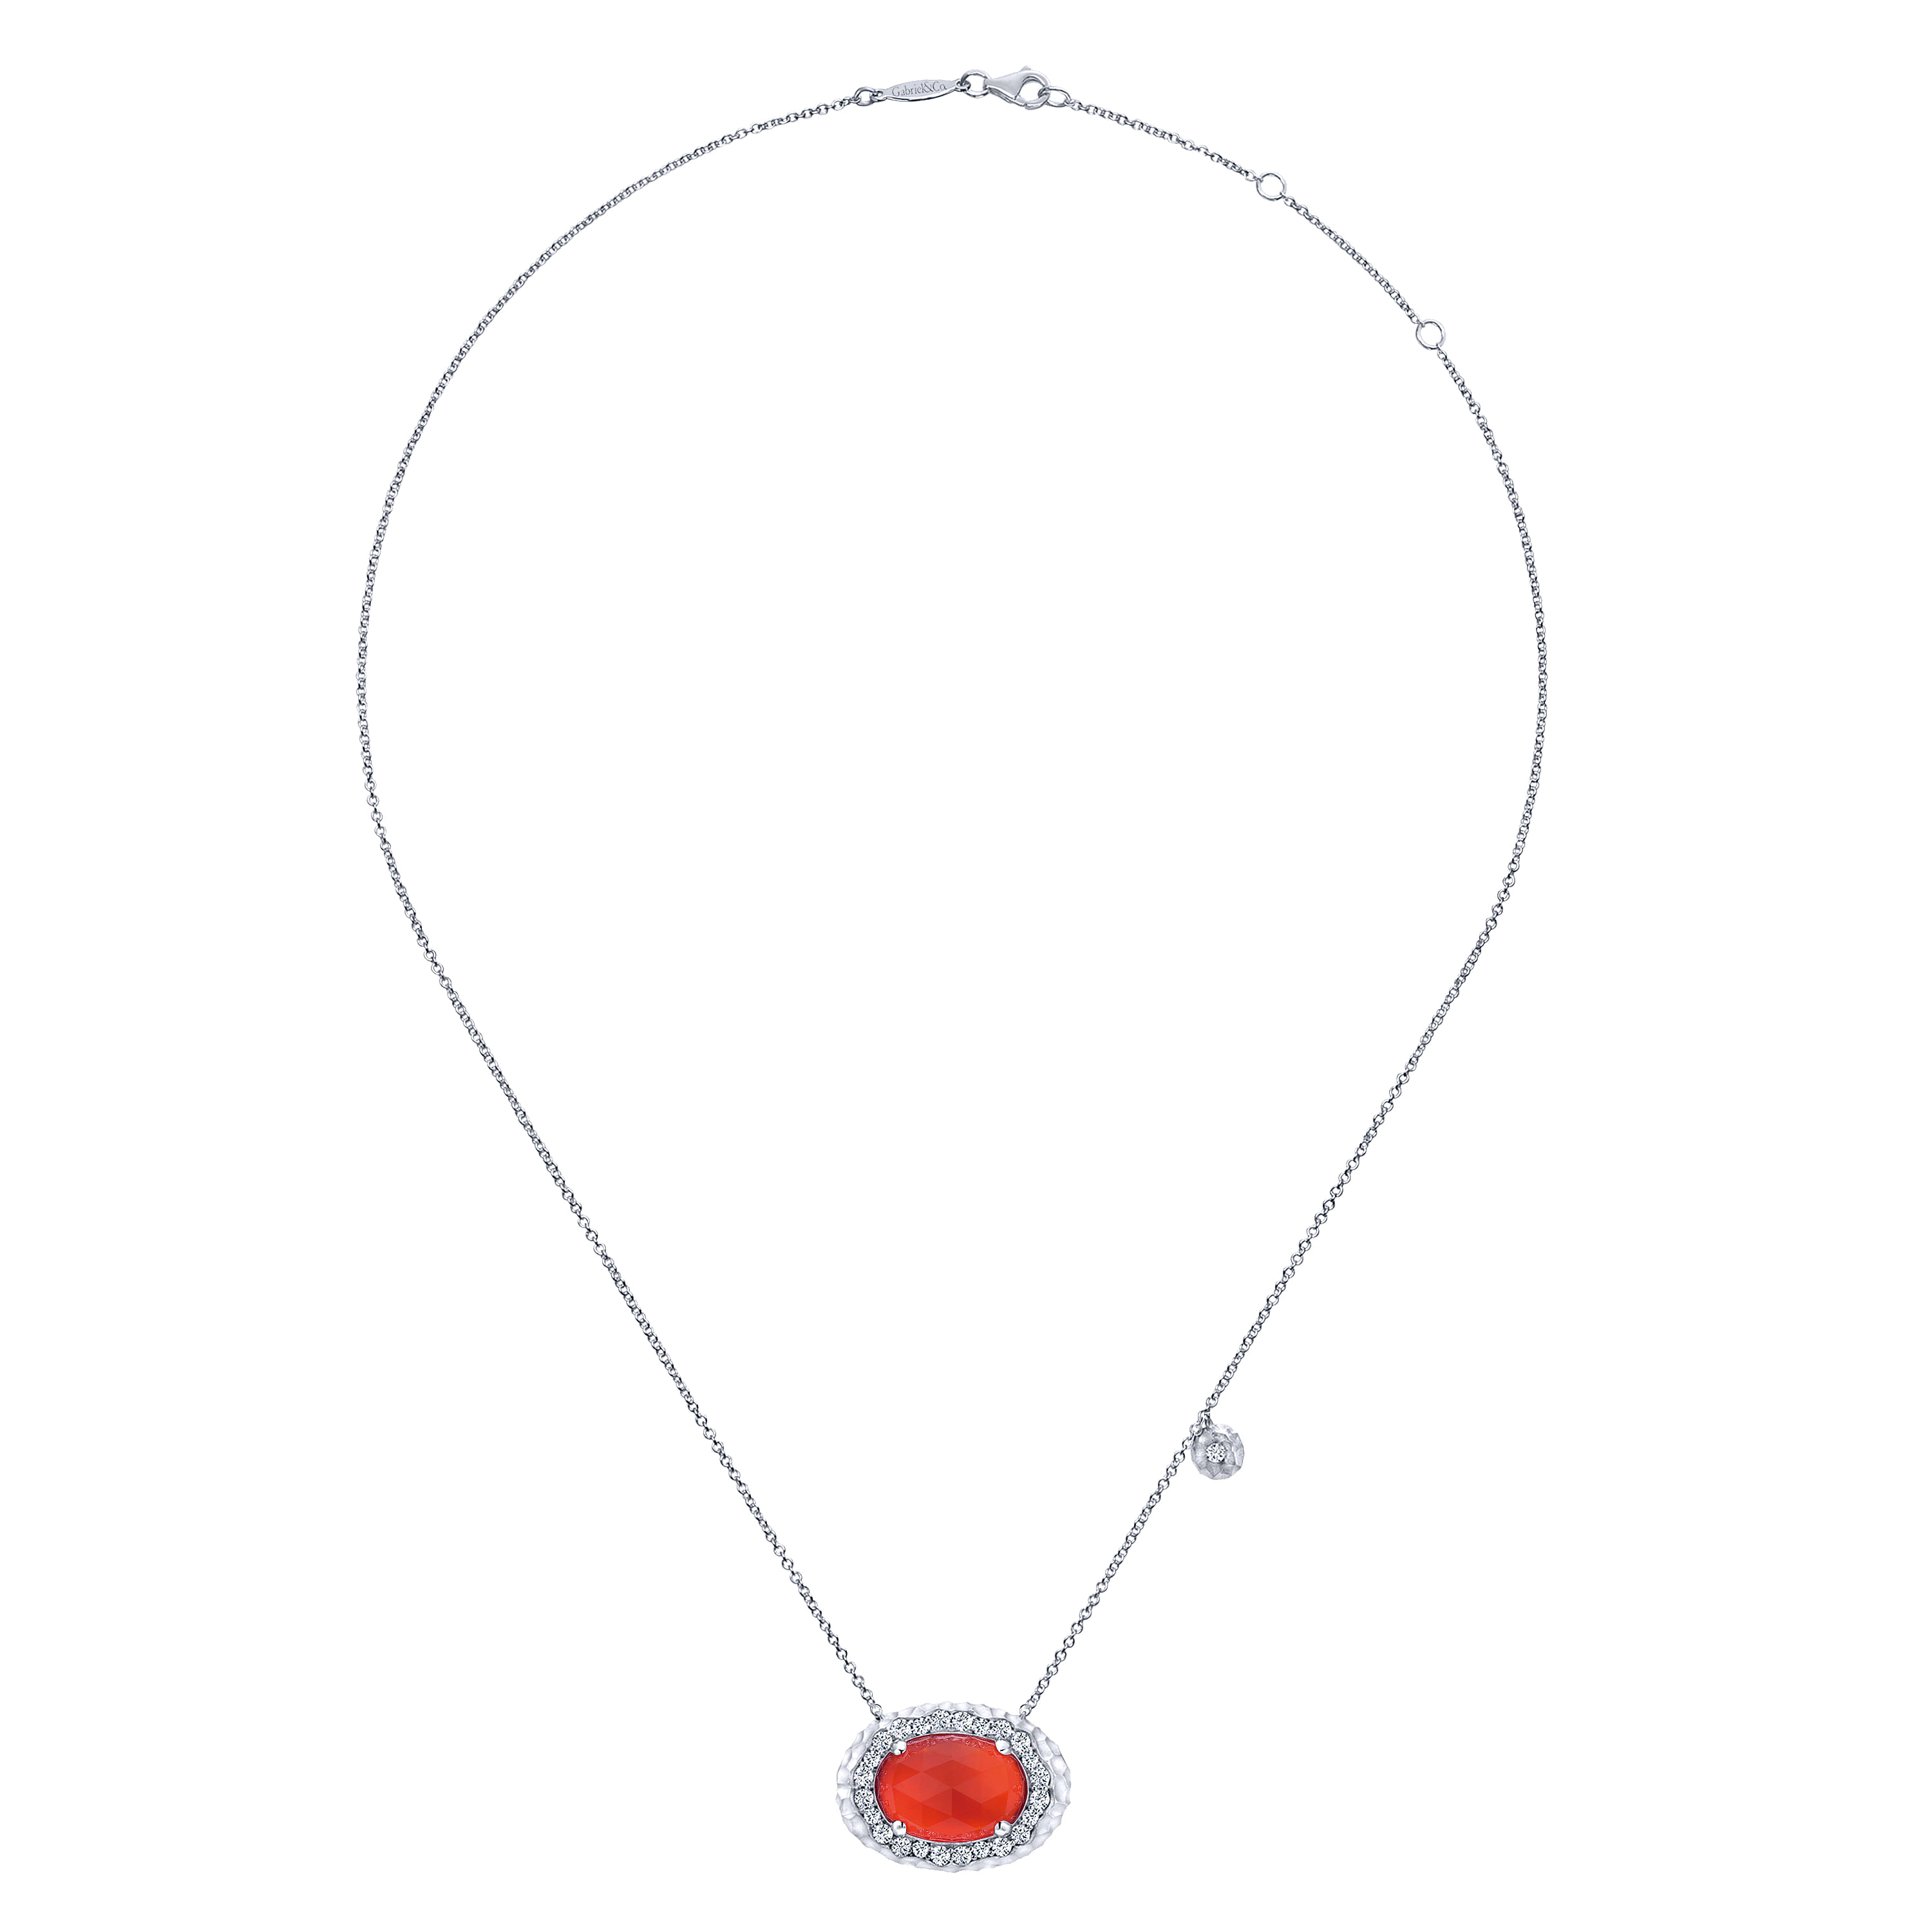 925 Sterling Silver Rock Crystal and Red Onyx Pendant Necklace with White Sapphire Halo